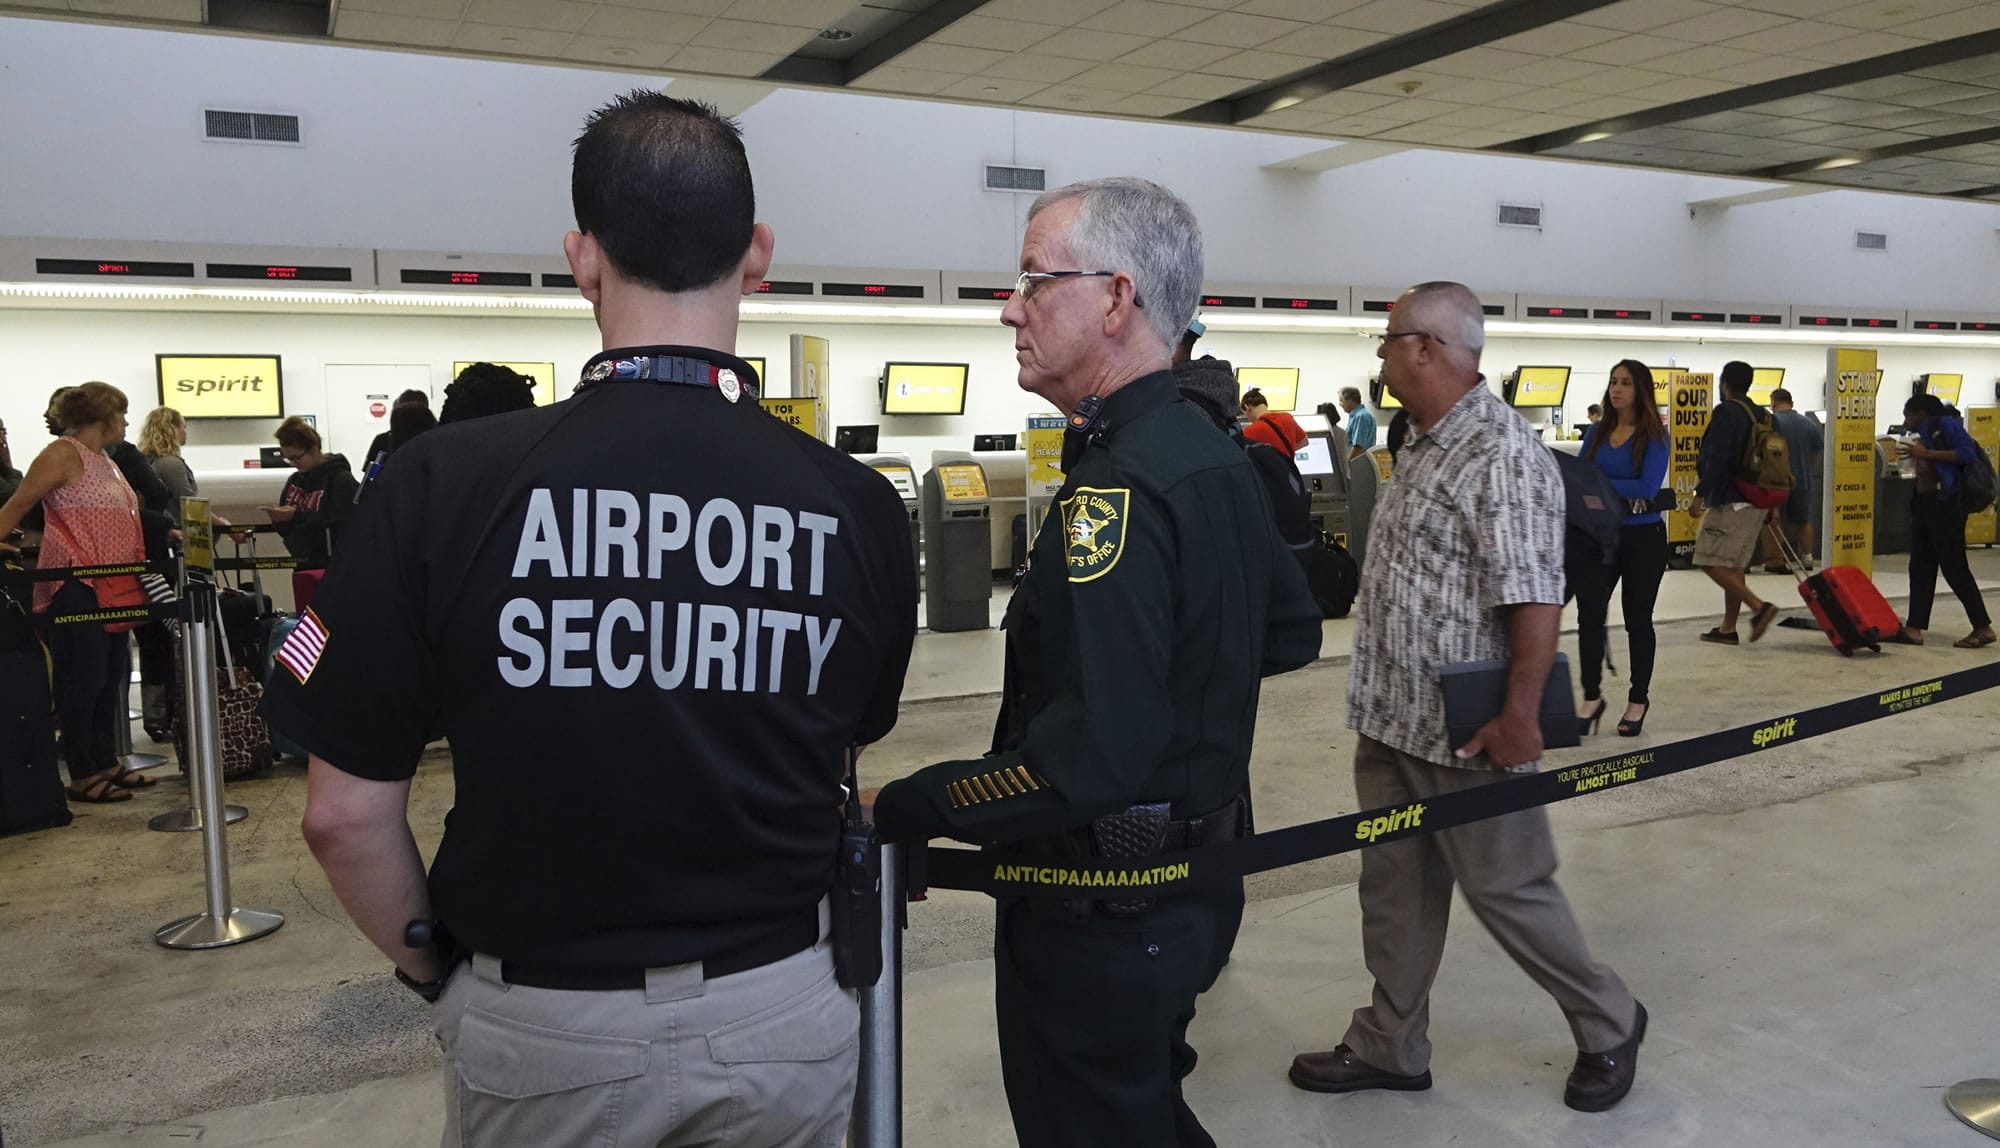 Airport Security and a Broward Sherriff's Deputy keep an eye on the line at Spirit Airlines, Tuesday, May 9, 2017, at the Fort Lauderdale-Hollywood International Airport in Fort Lauderdale, Fla. Skirmishes involving irate passengers broke out at the Florida airport Monday following the cancellation of multiple Spirit Airlines flights.